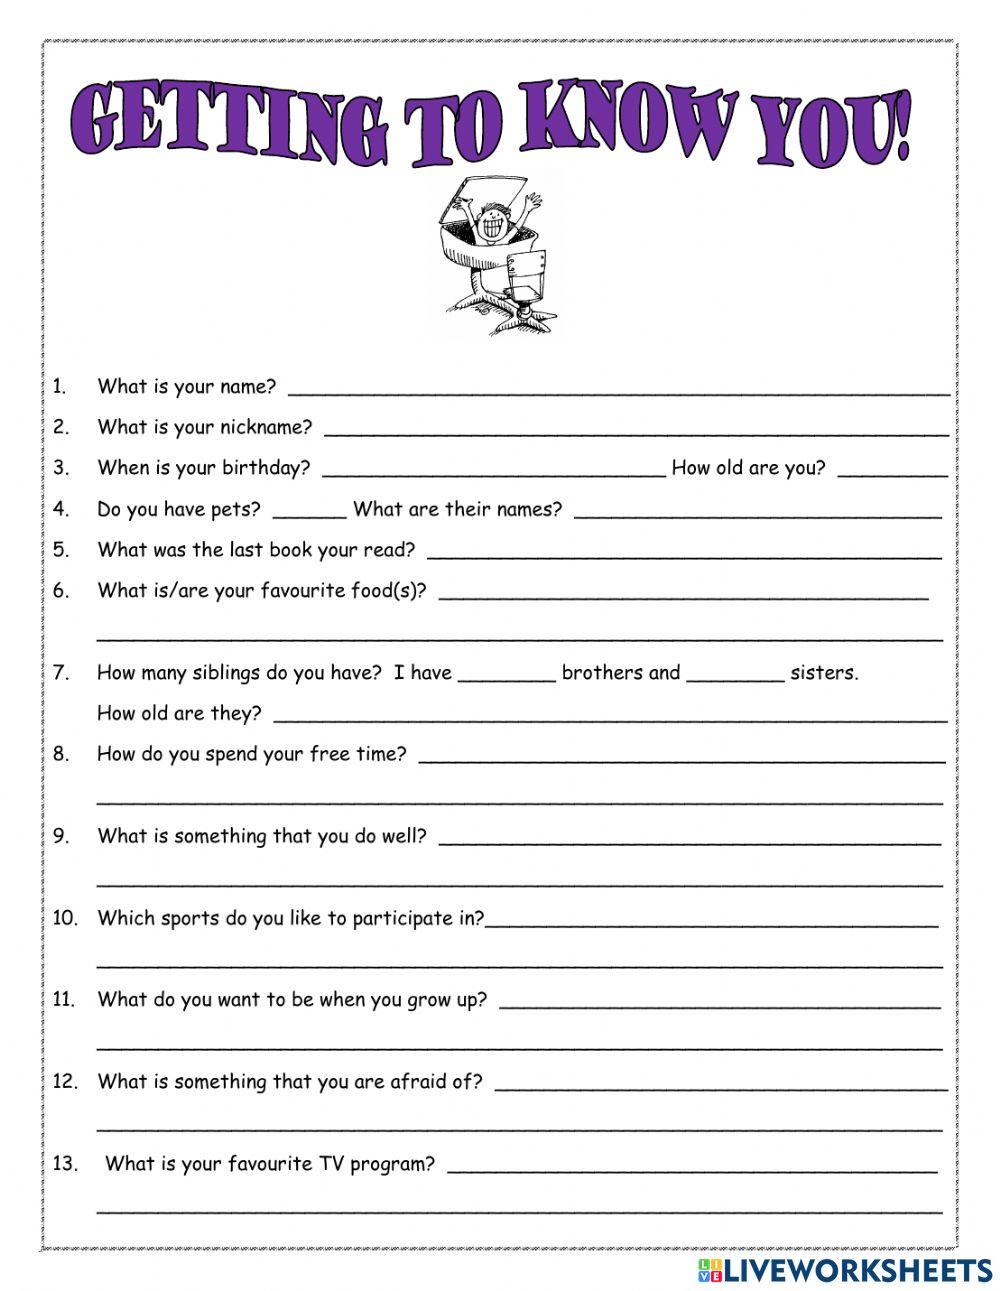 Getting to Know You online activity for 4 | Live Worksheets